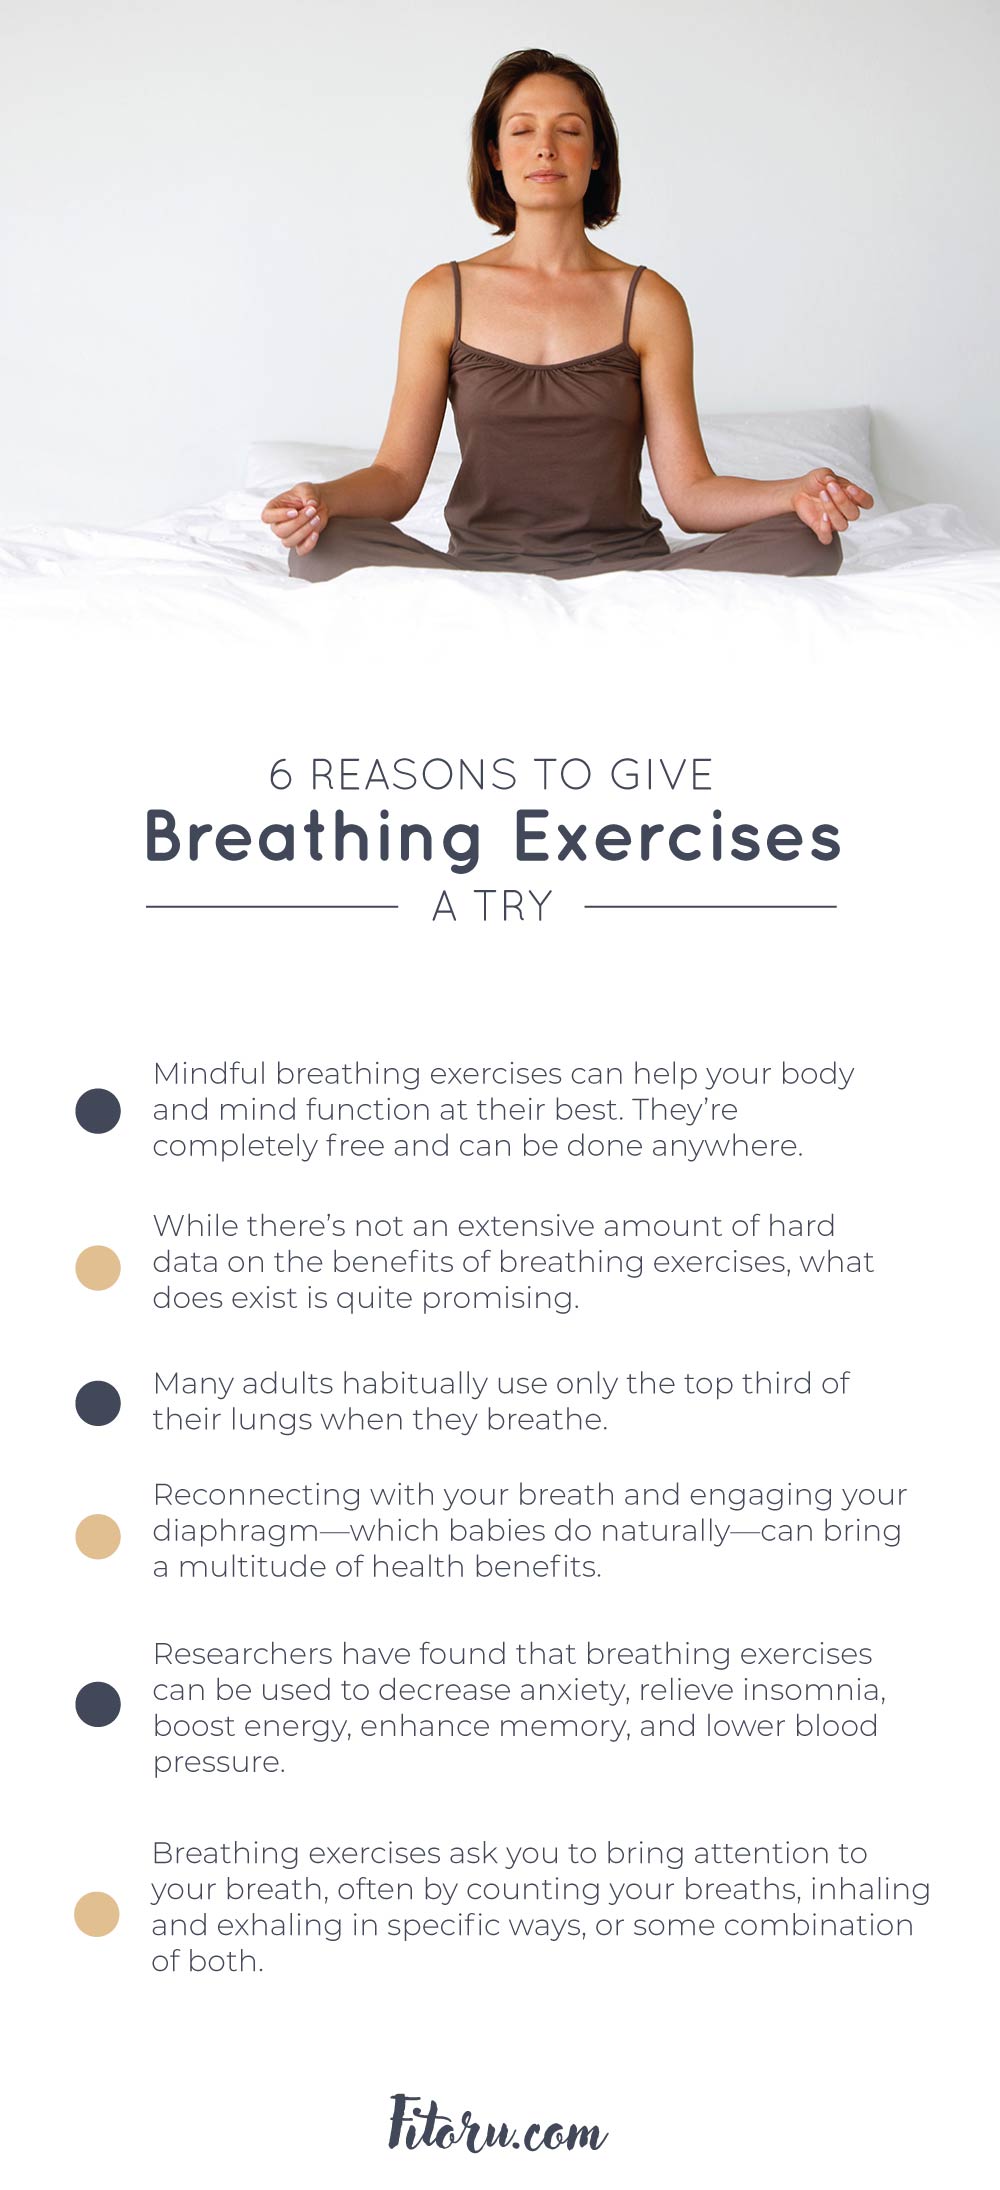 6 Reasons to Give Breathing Exercises a Try